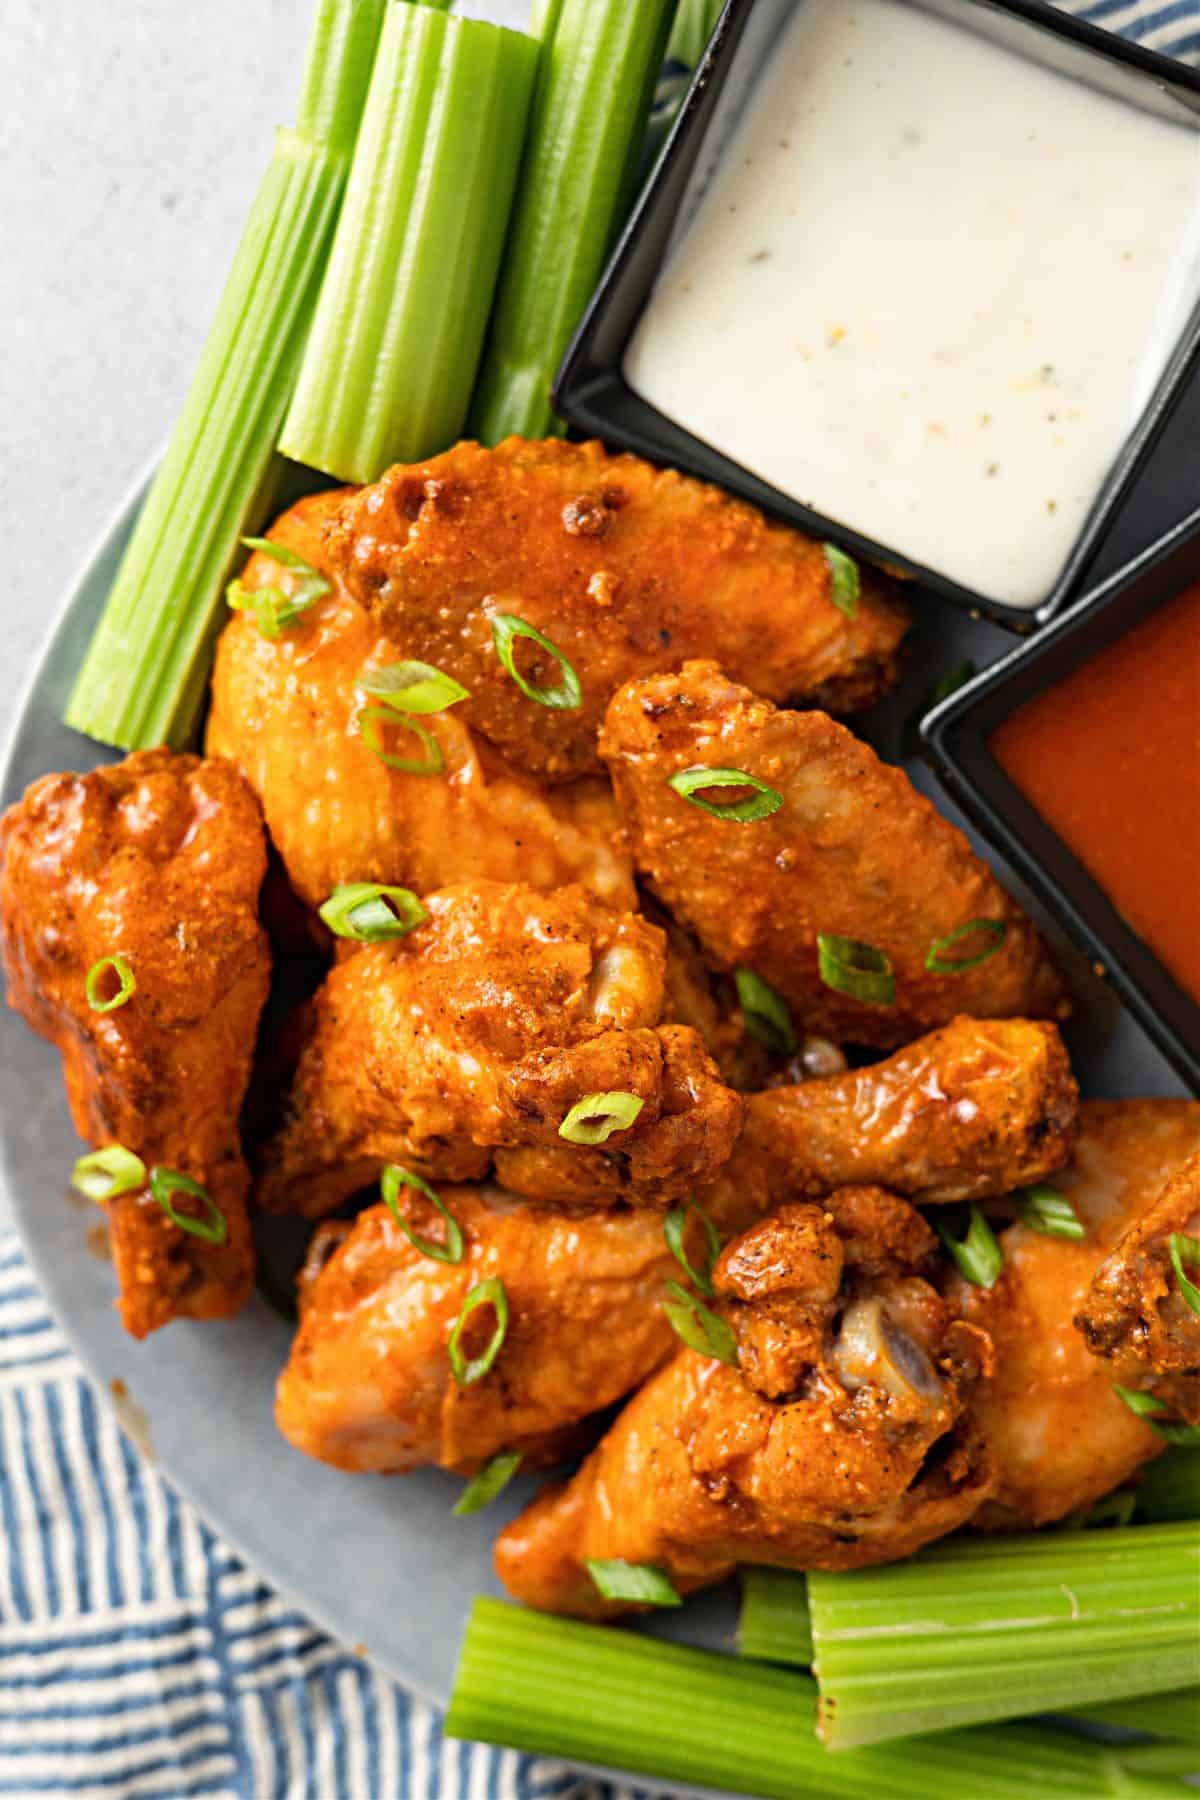 Baked Buffalo Wings, celery and dipping sauce on a plate